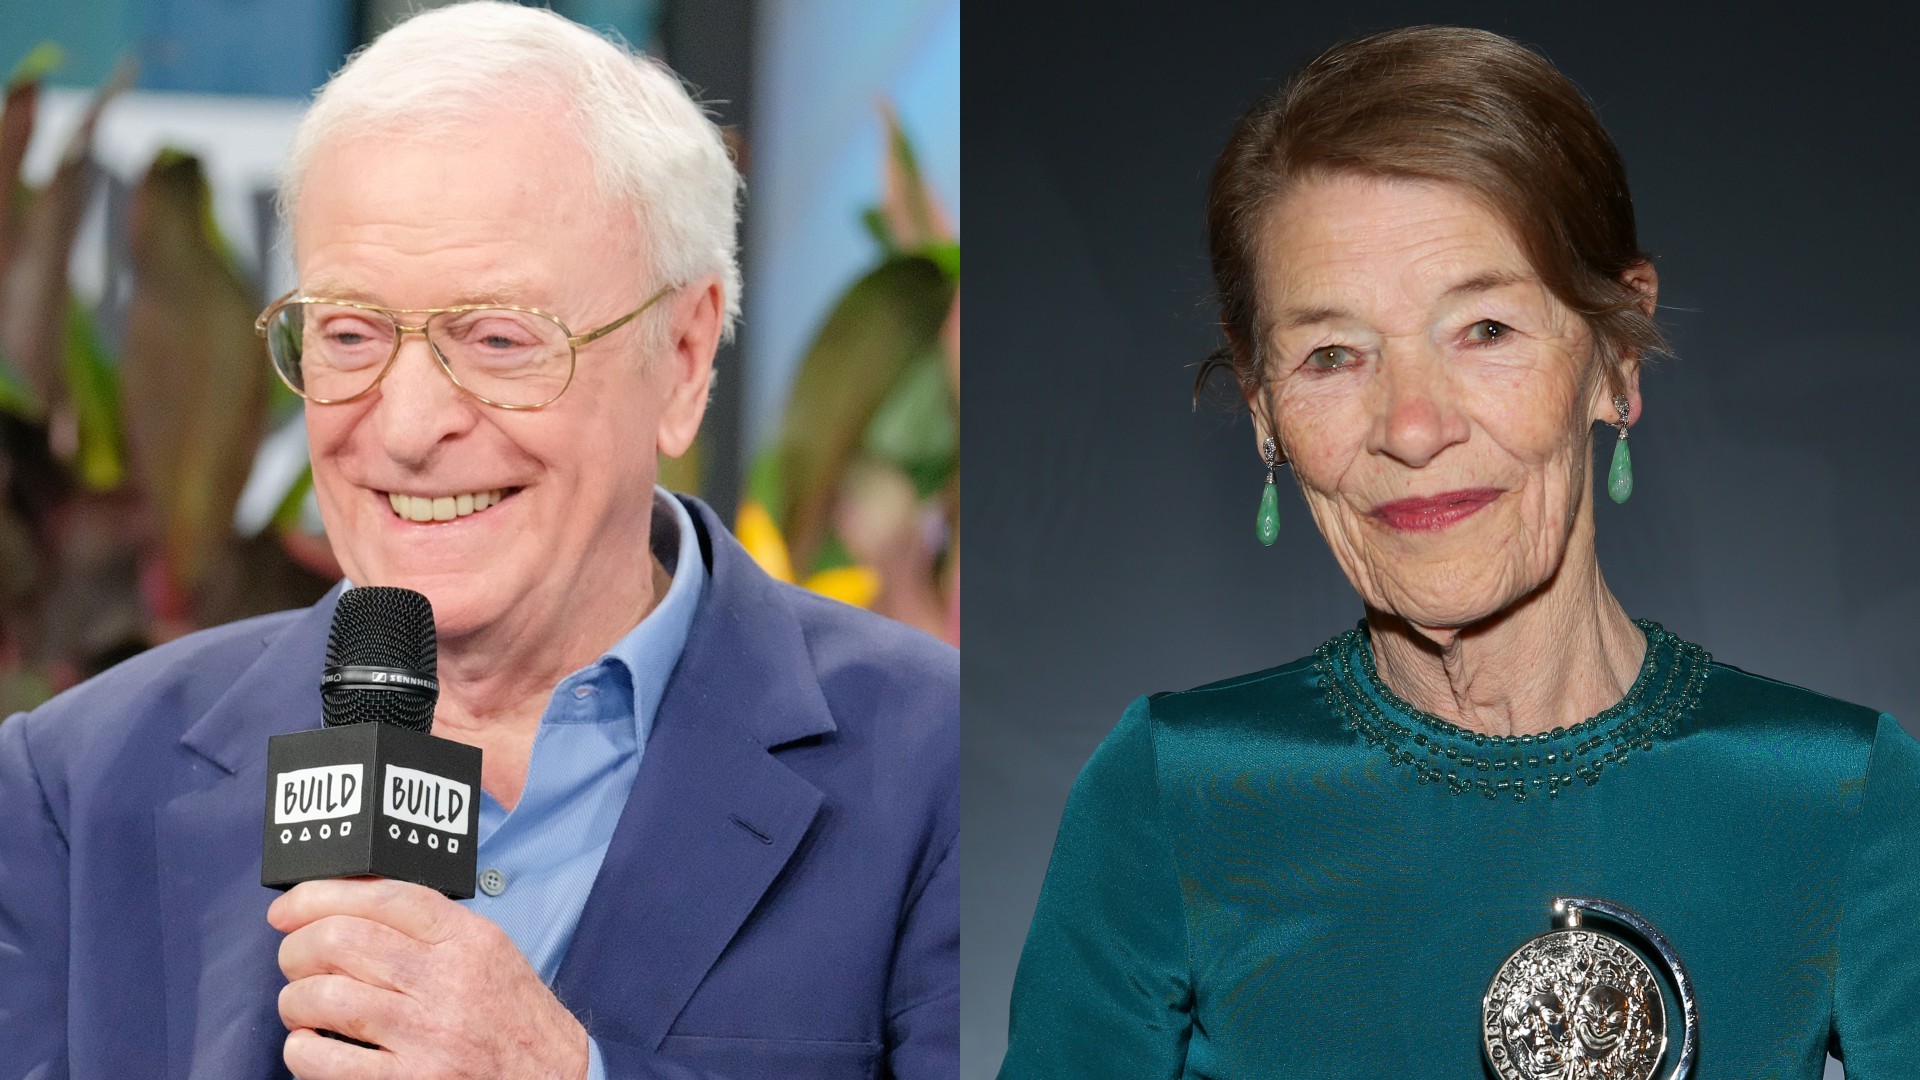 Casting News: Sir Michael Caine and Glenda Jackson to Star in Remarkable Real-Life Movie 'The Great Escaper'